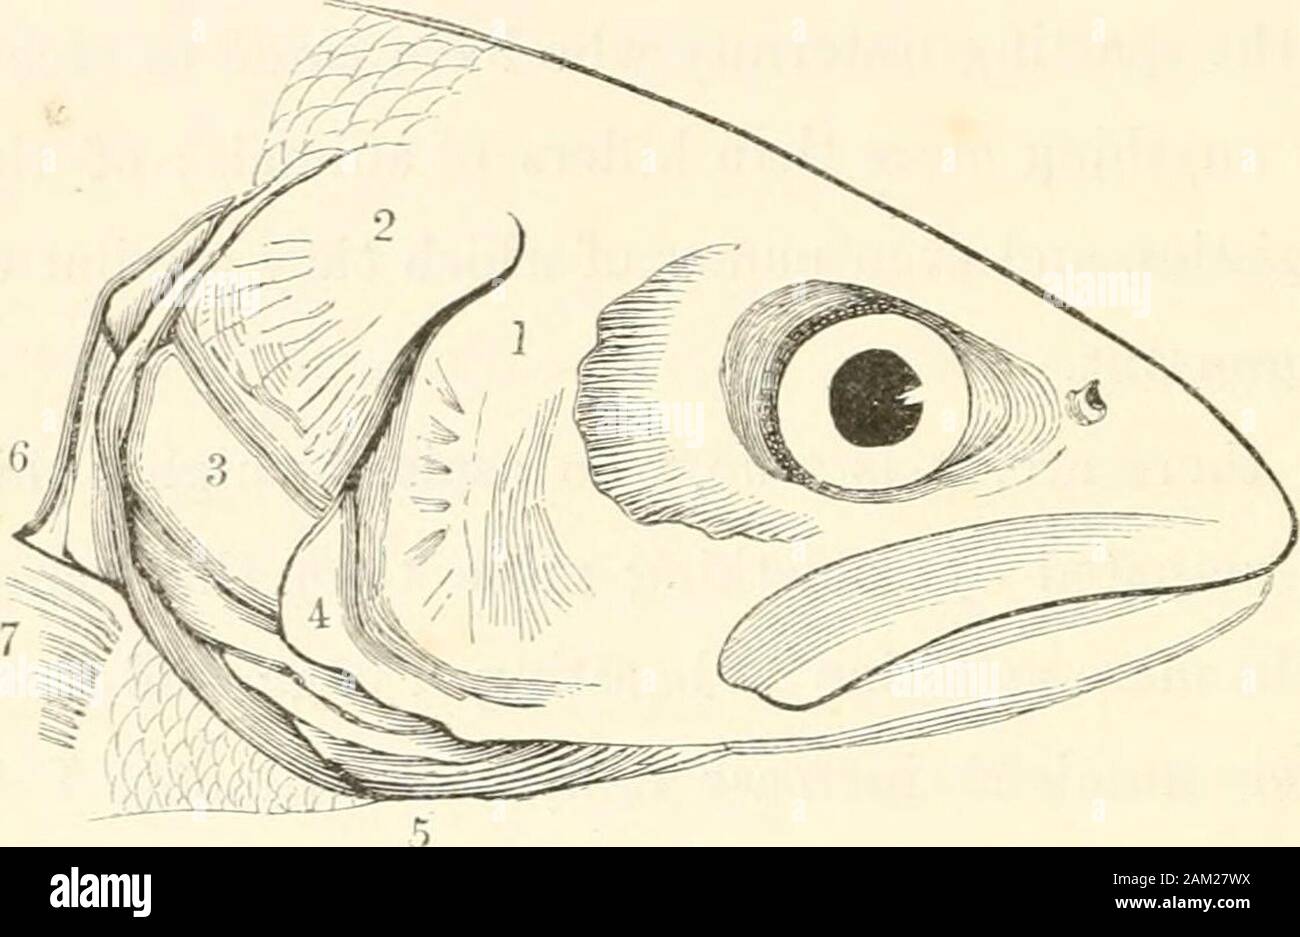 Frank Forester's fish and fishing of the United States and British provinces of North America . fidly aspired to the honours of a naturalist ;and has most deservedly ac(piircd, as such, no small degree ofcelebrity and favour. From this sljort excursion, into which 1 have been naturallyled in the course of my subject, I return to the description ofthe gill-covers of fish, and thereafter to the dental system, themethod of comparing which I shall lay down briefly for the useof the learner, and then proceed at once to the history ofSporting Fislies. The subject, which I now present, is the head of Stock Photo